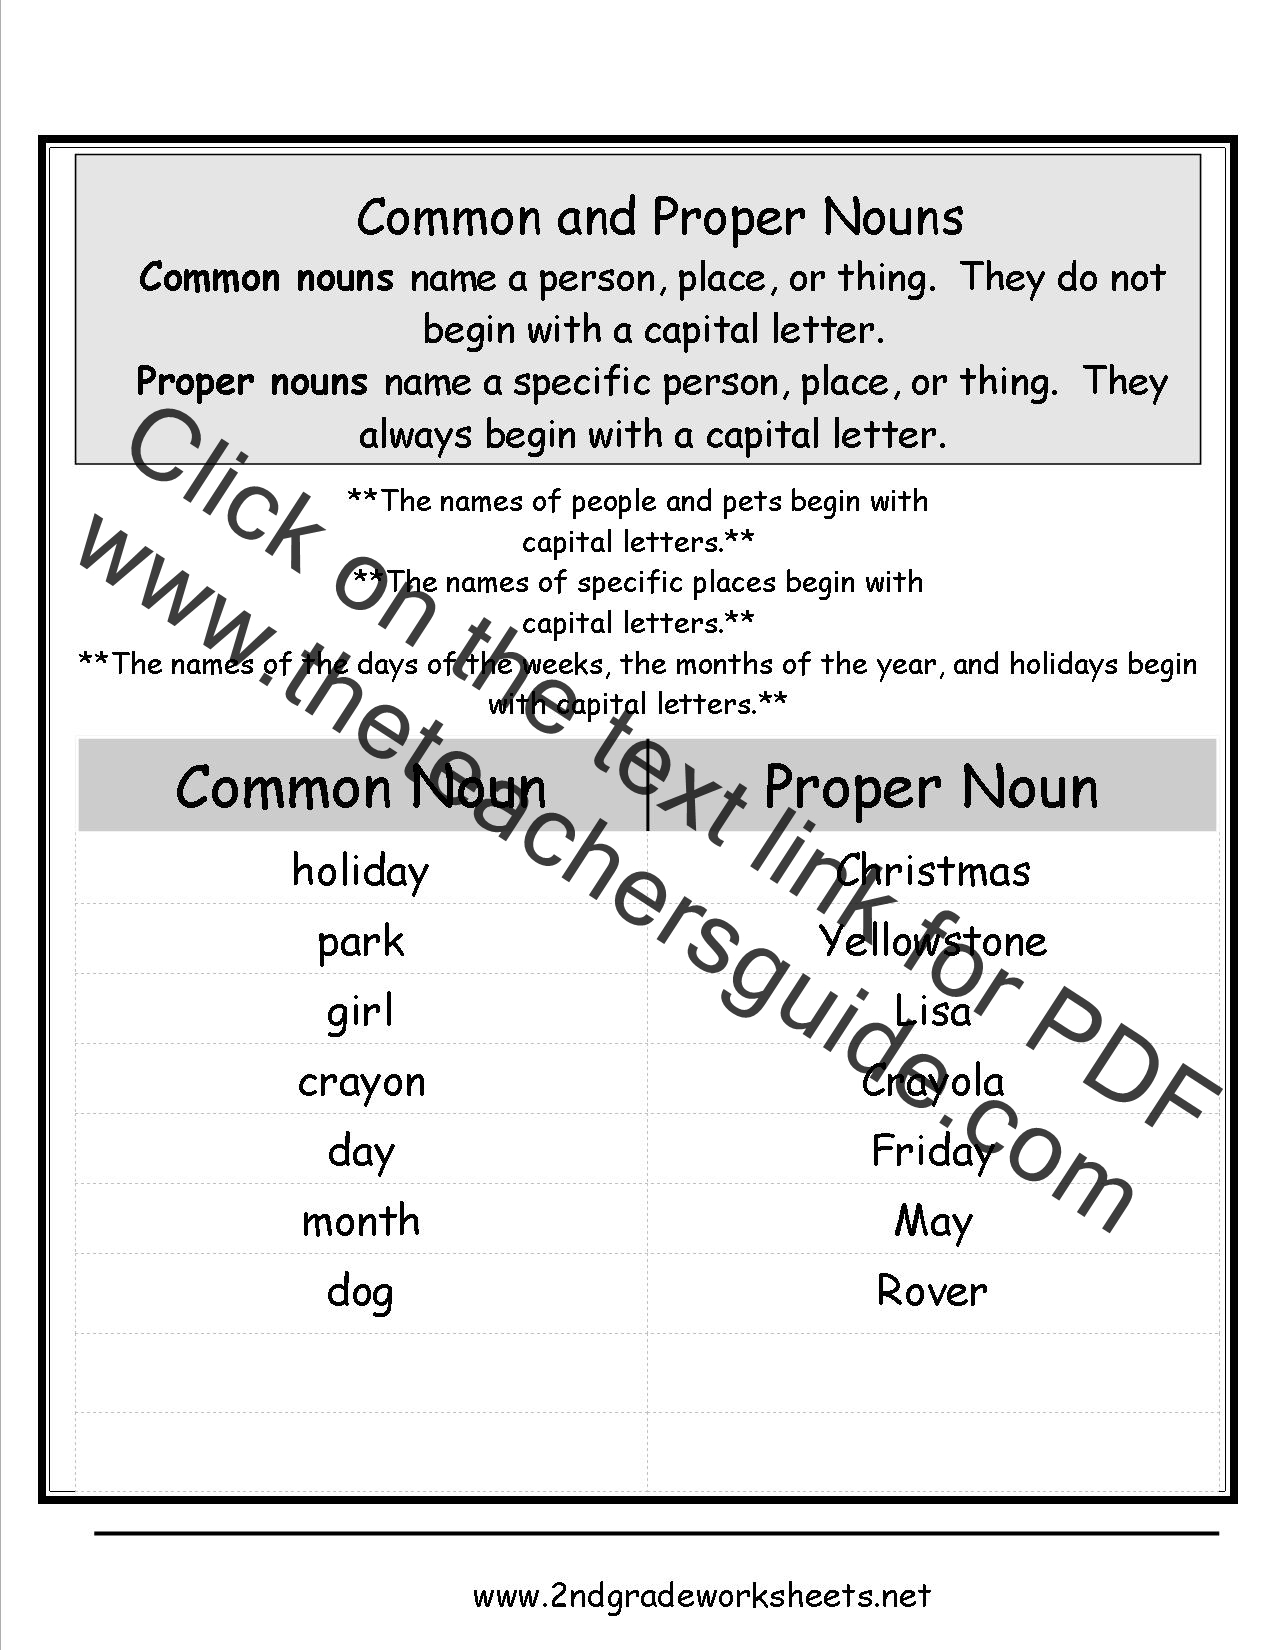 Common and Proper Nouns Worksheet Pertaining To Proper Nouns Worksheet 2nd Grade